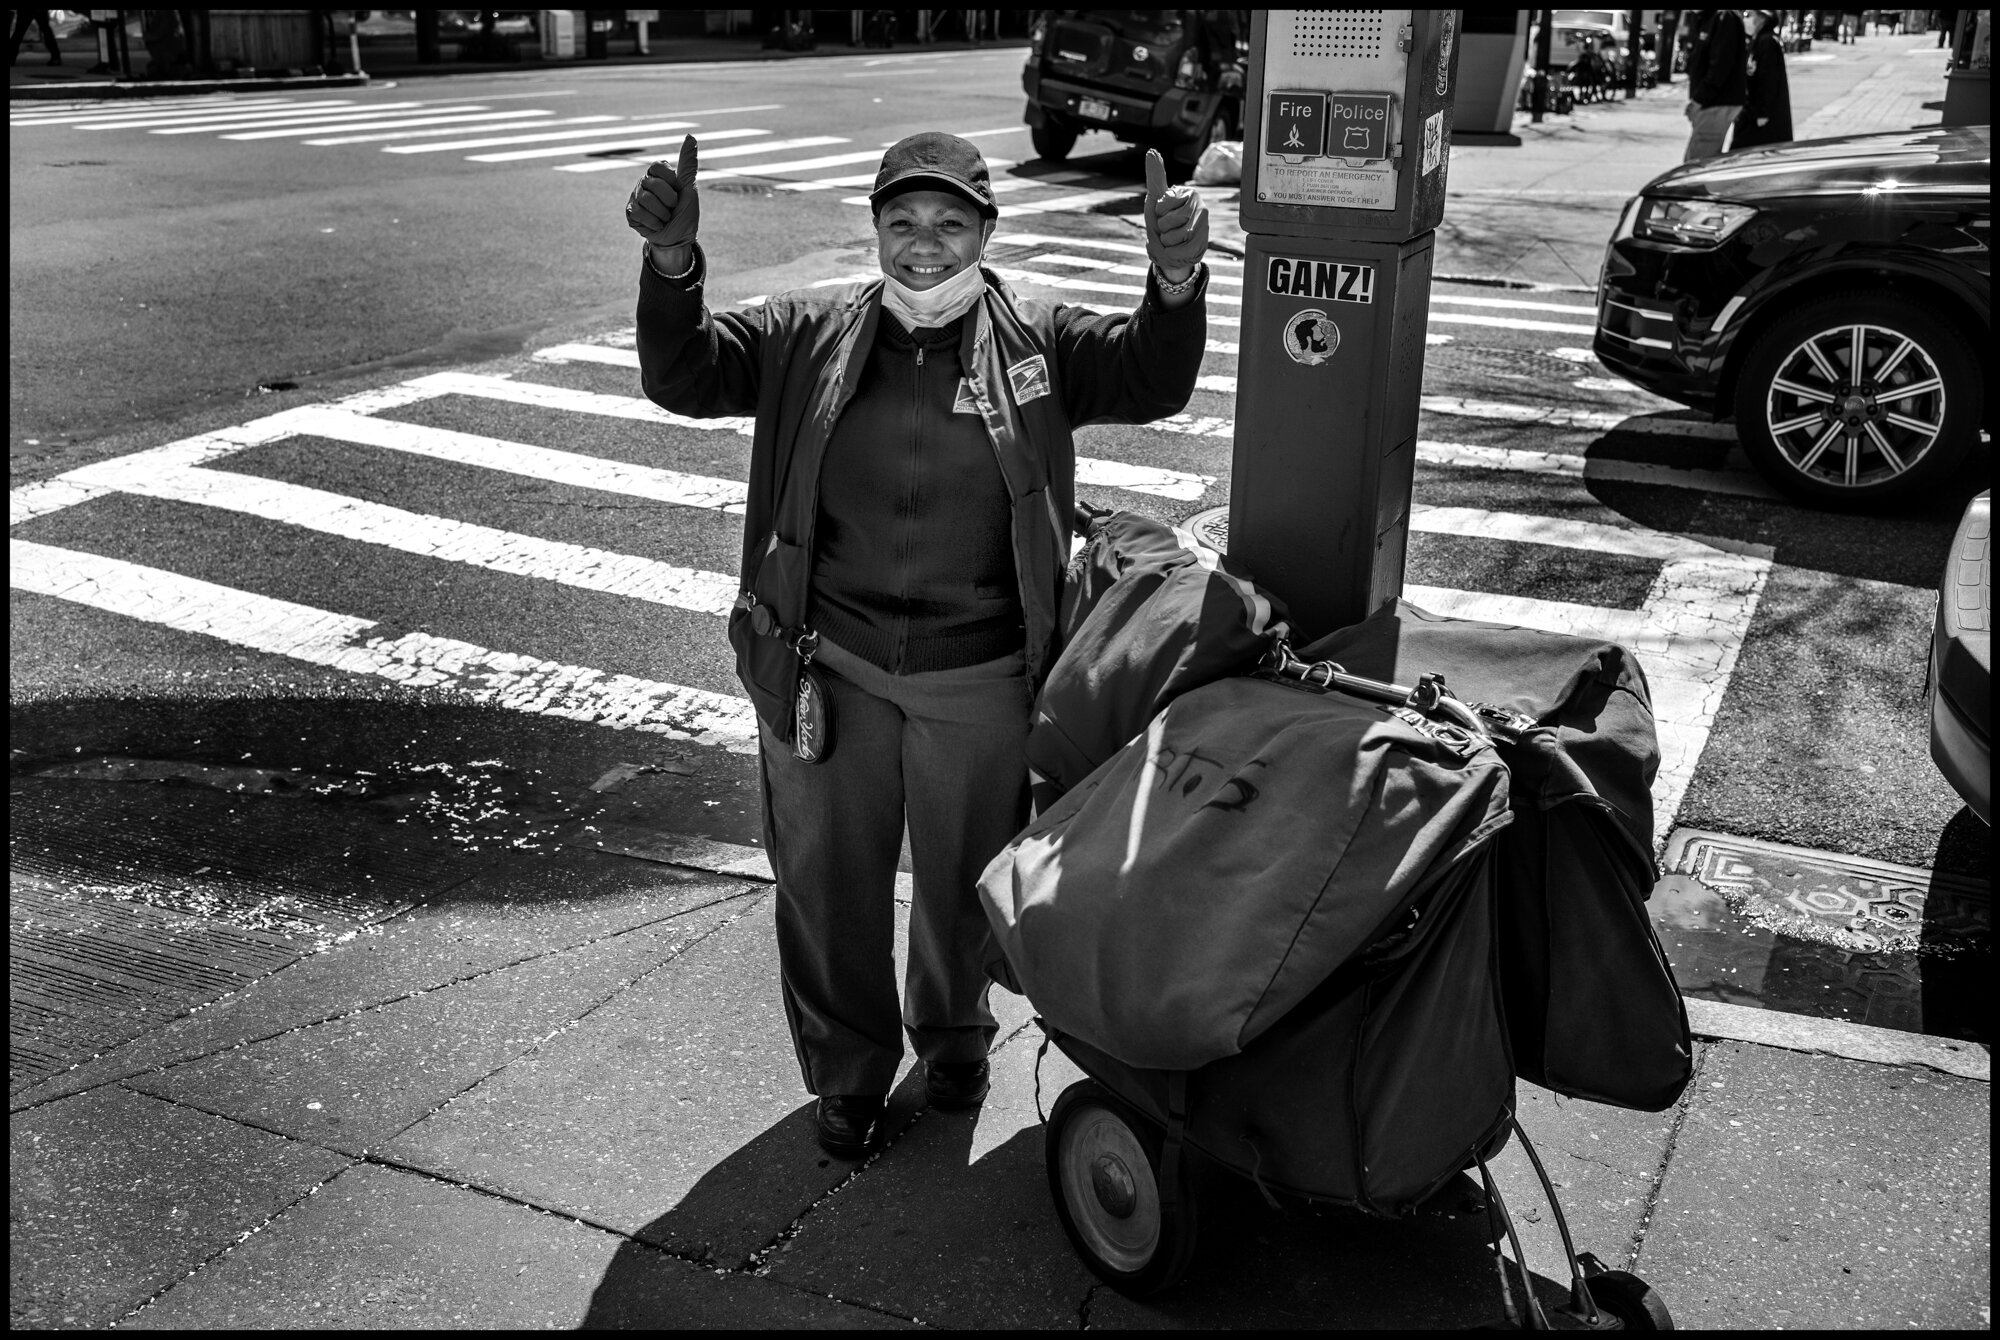  Carline, who used to deliver my mail.   April 4, 2020. © Peter Turnley  ID# 12-002 